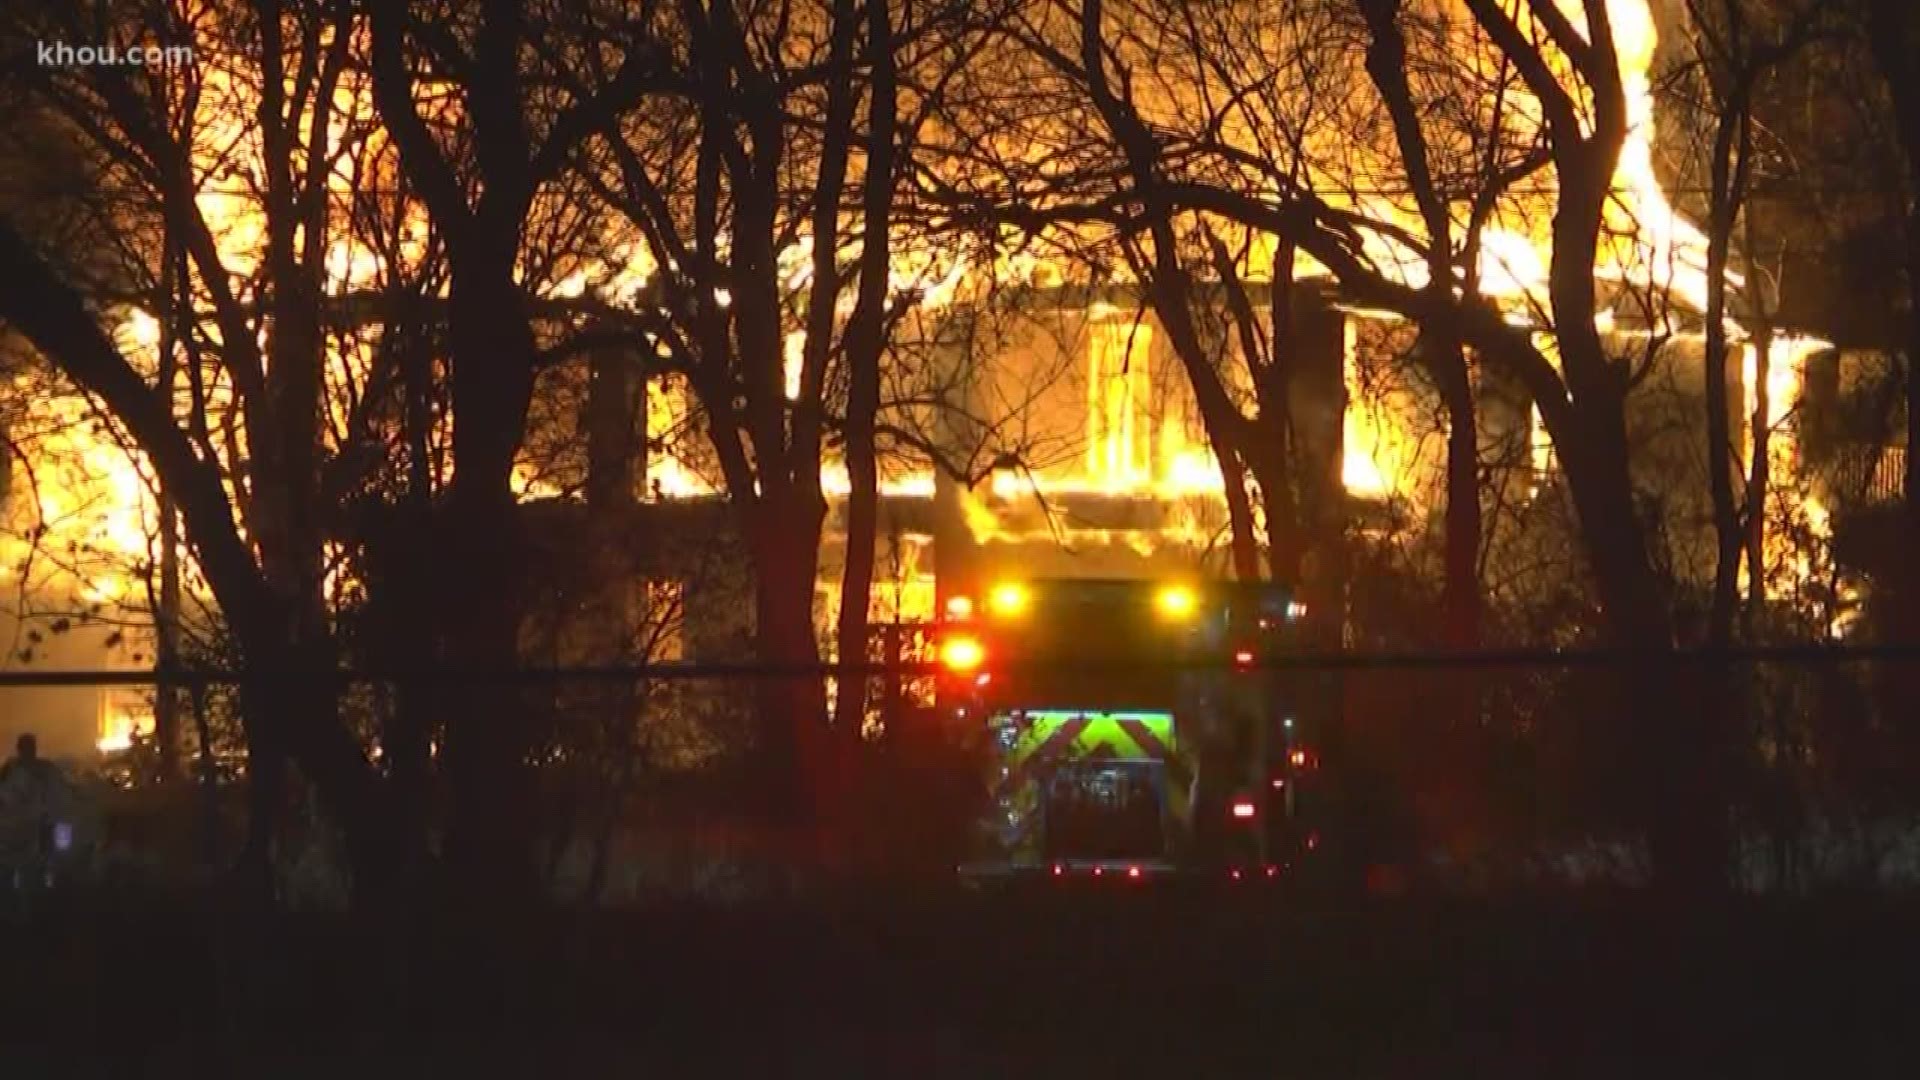 A massive house fire destroyed an abandoned home just off the North Beltway 8 overnight.